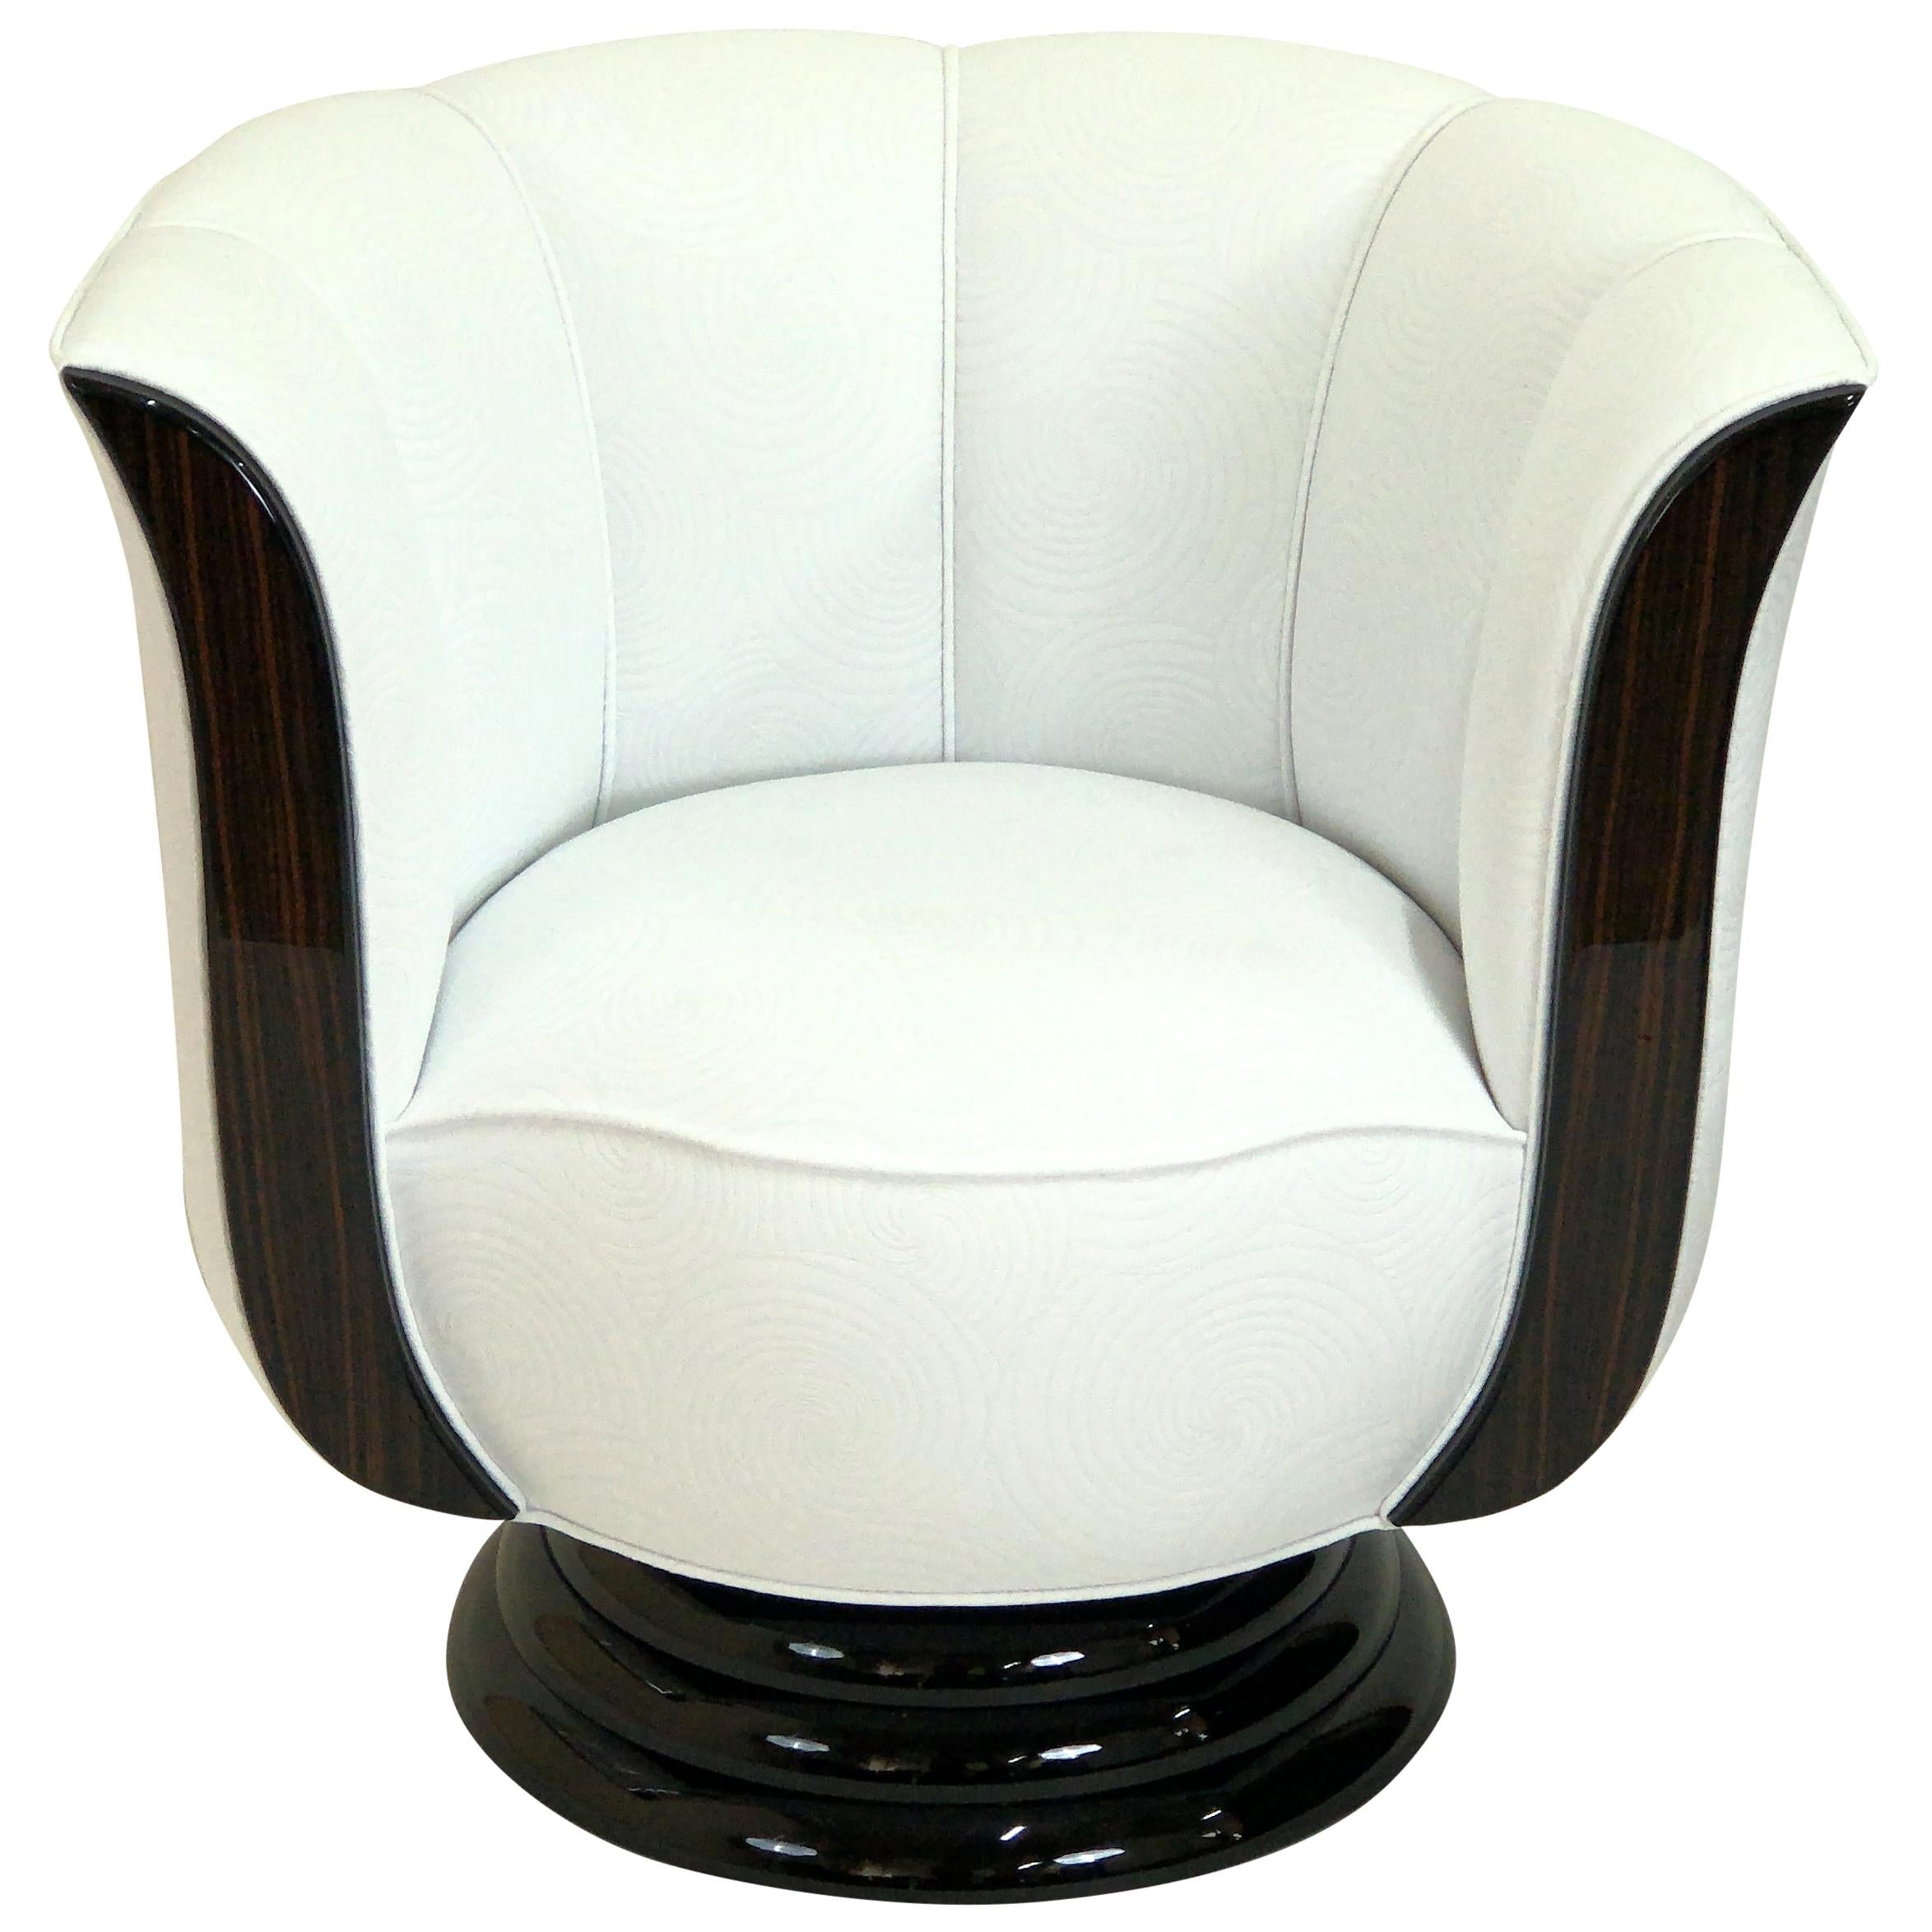 Revolving White Art Deco Style Tulip Shaped Club Chair with Macassar Panels